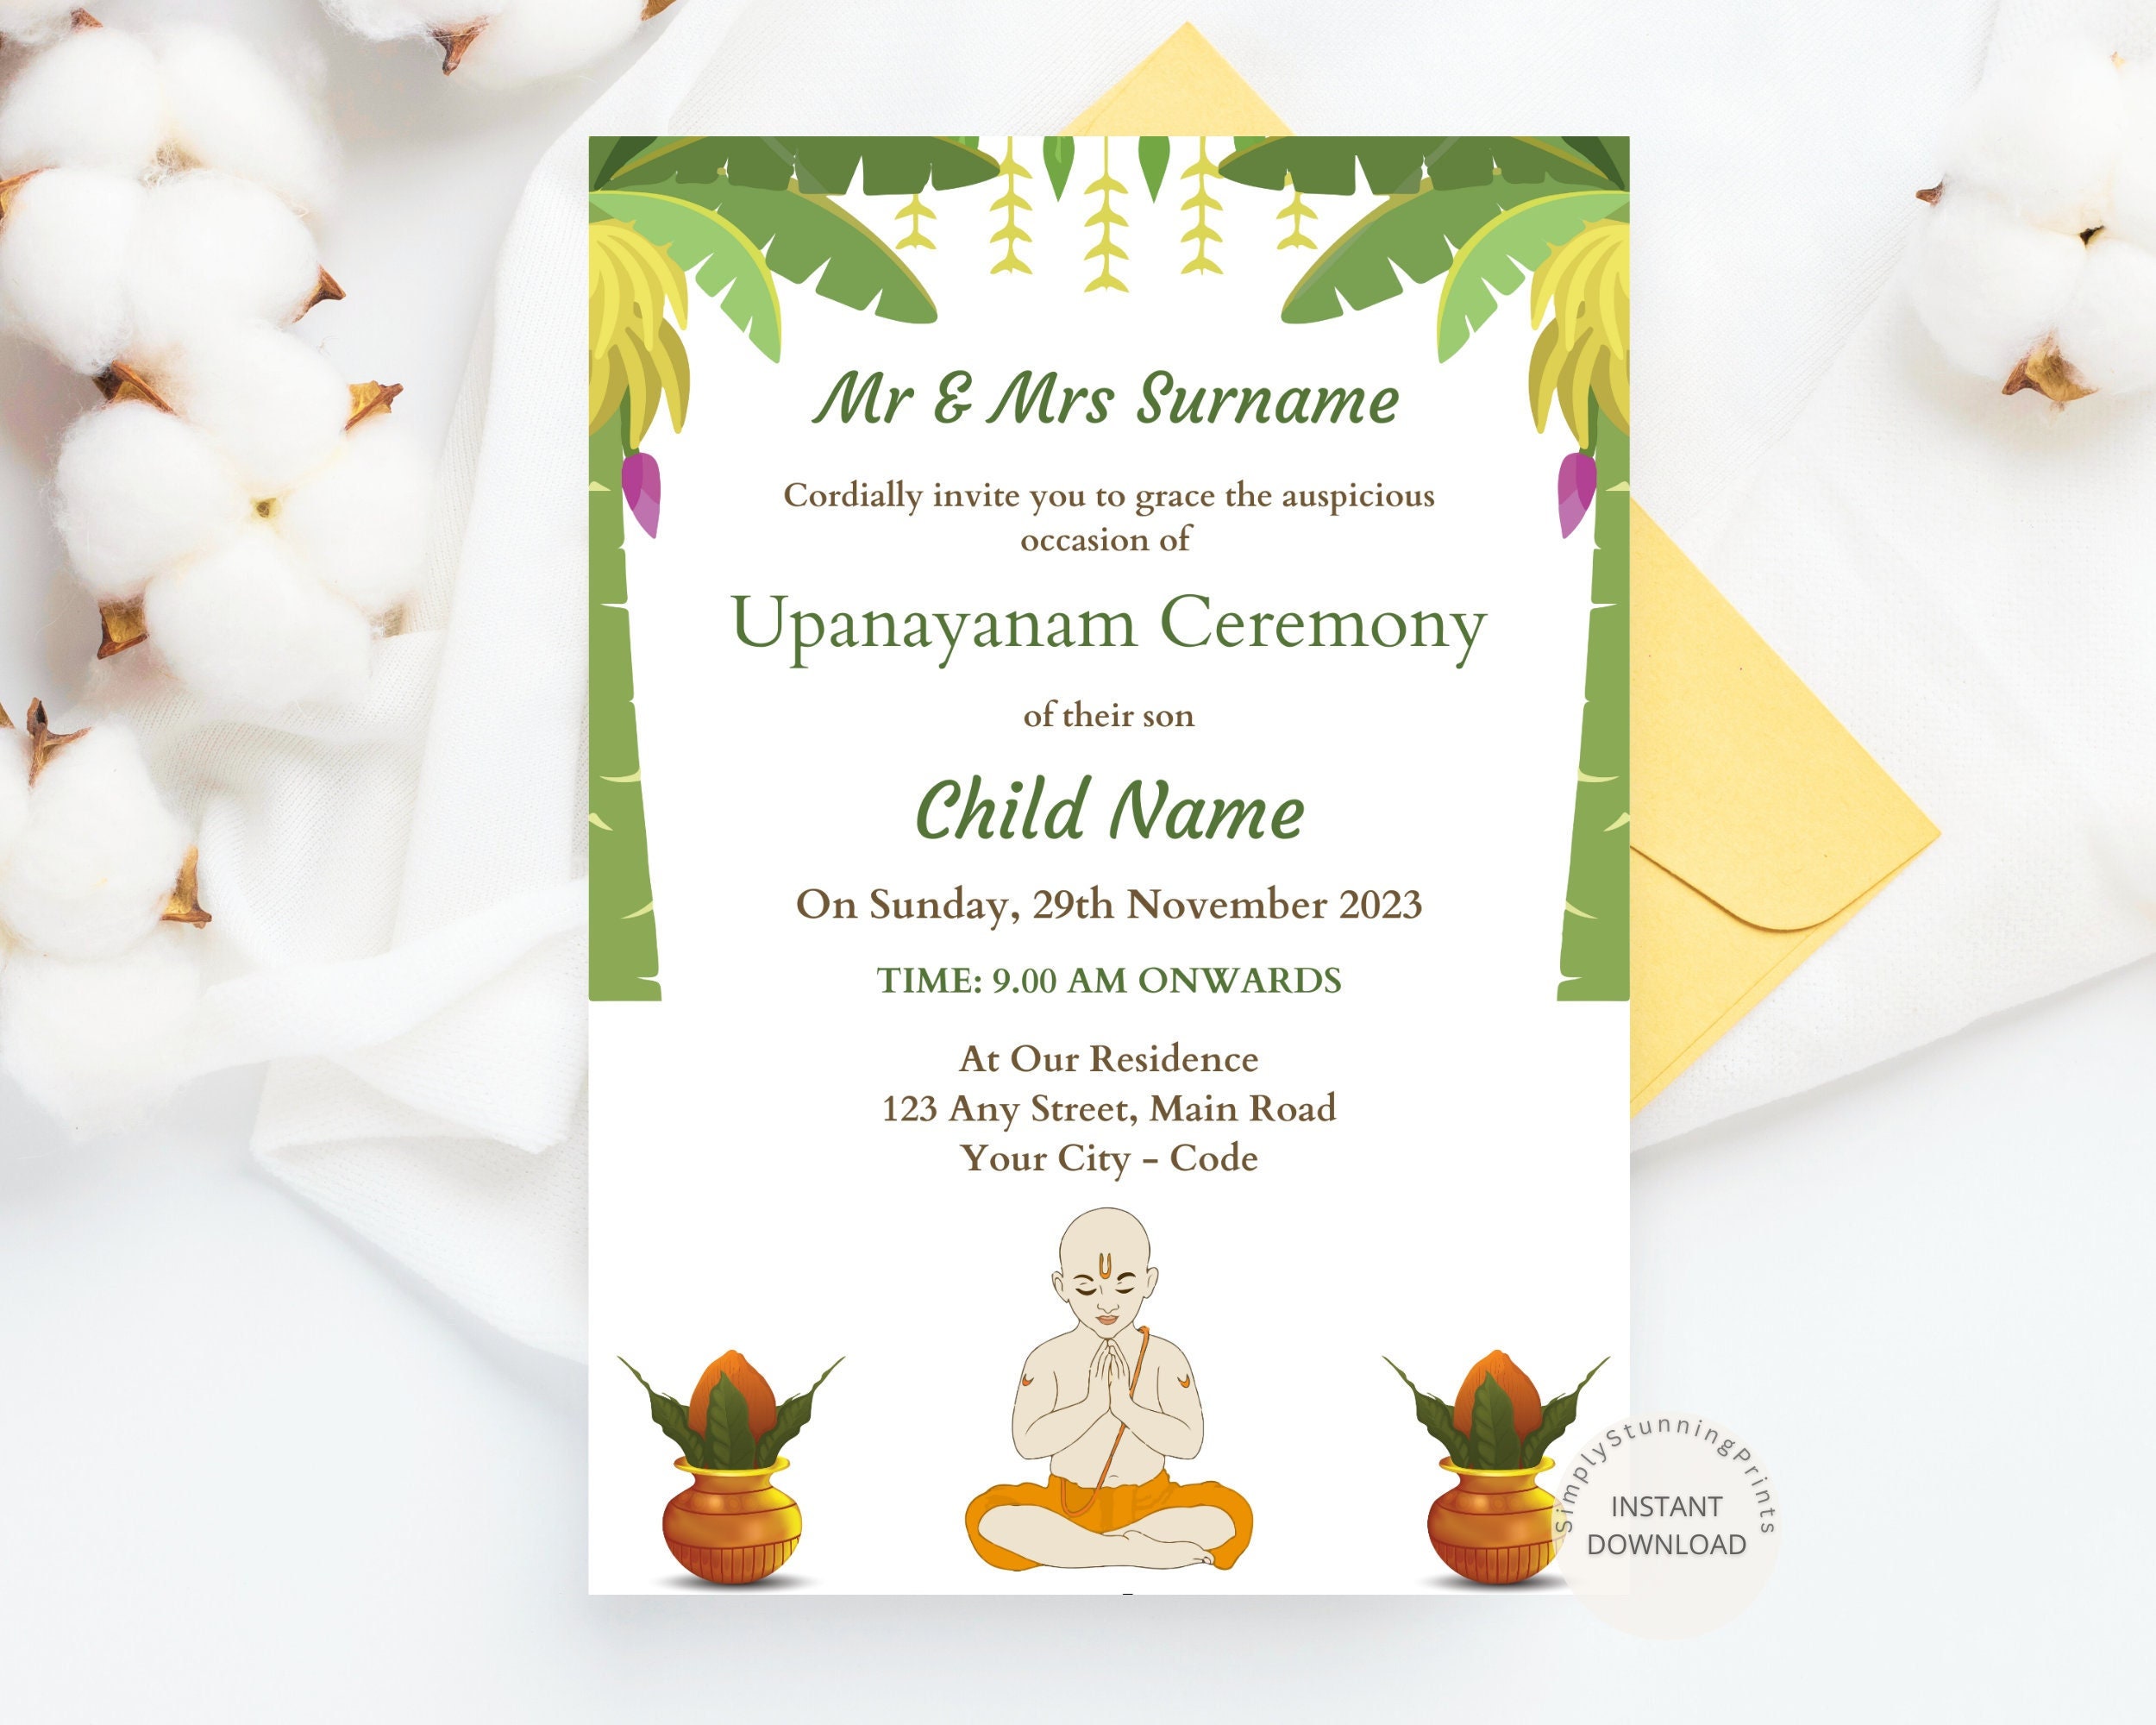 FREE Ceremony Invitation Templates & Examples - Edit Online & Download